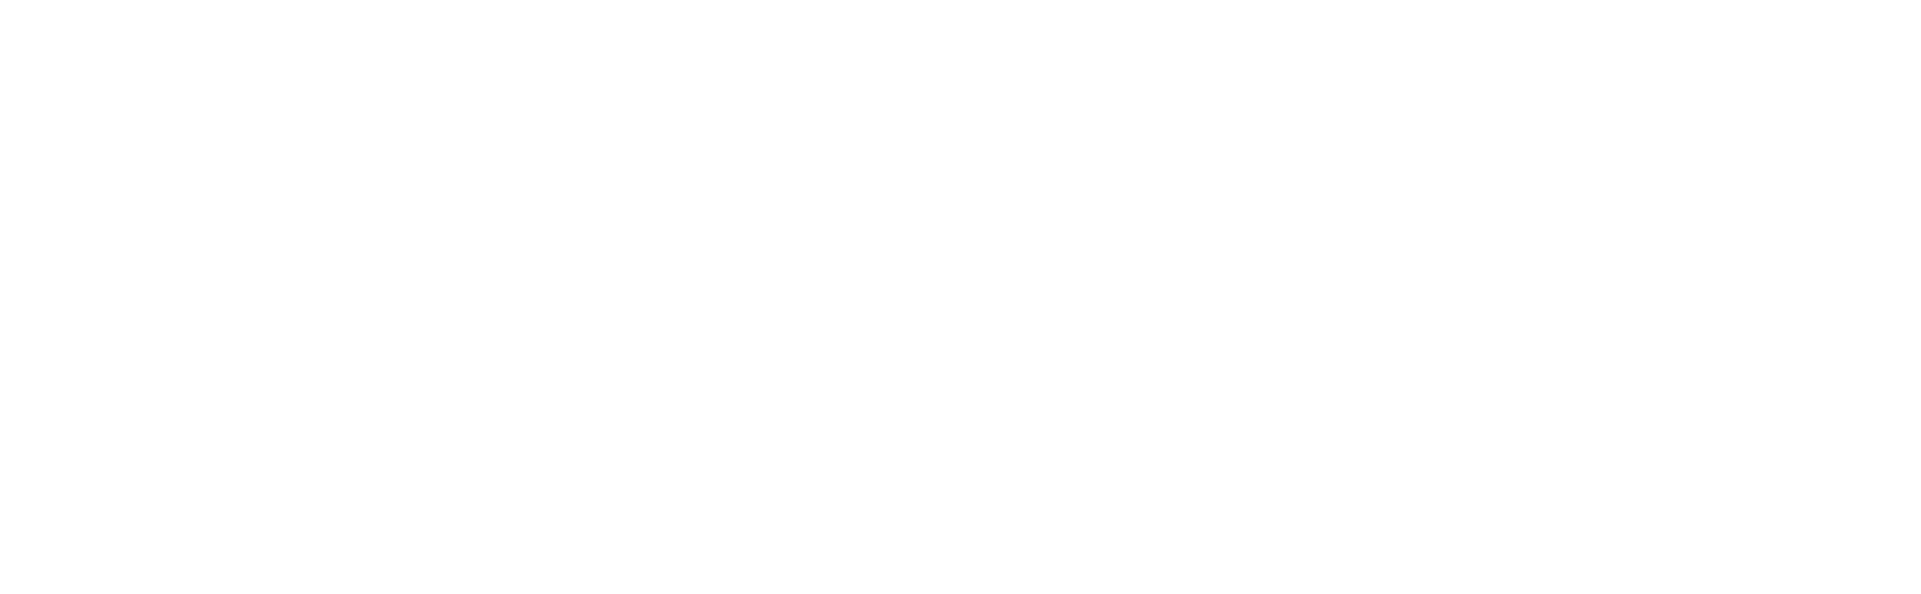 Change the Channel